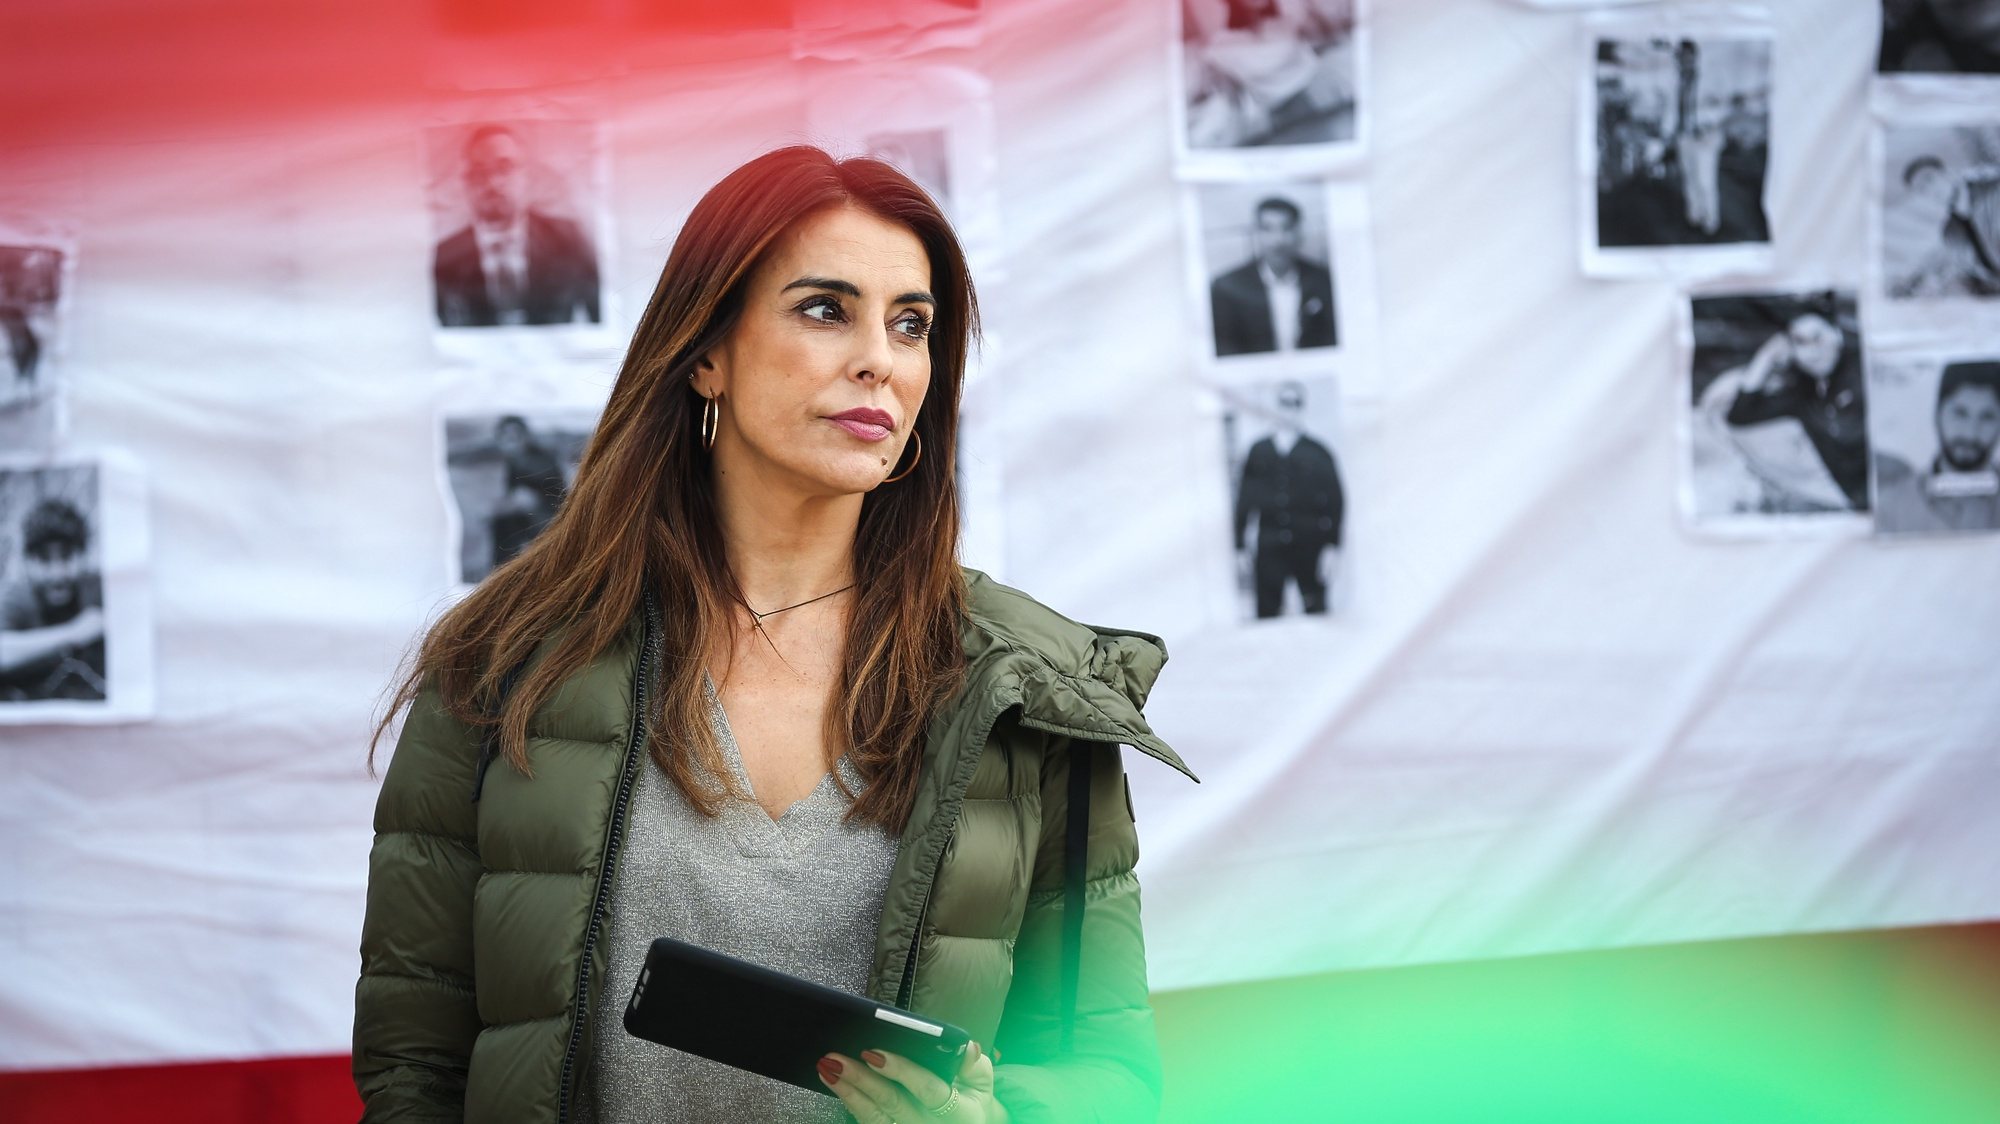 epa10314903 Portuguese TV presenter Catarina Furtado takes part in the demonstration in support of the revolution in Iran, in Lisbon, Portugal, 19 November 2022. In memory of the over 3,000 Islamic Republic victims who were killed during the 2019 protests in Iran and as a show of support for the current revolution in that country, a global day of action is taking place in 25 countries, including the US, UK, Spain, Germany, France, Japan, Australia, among others.  EPA/RODRIGO ANTUNES